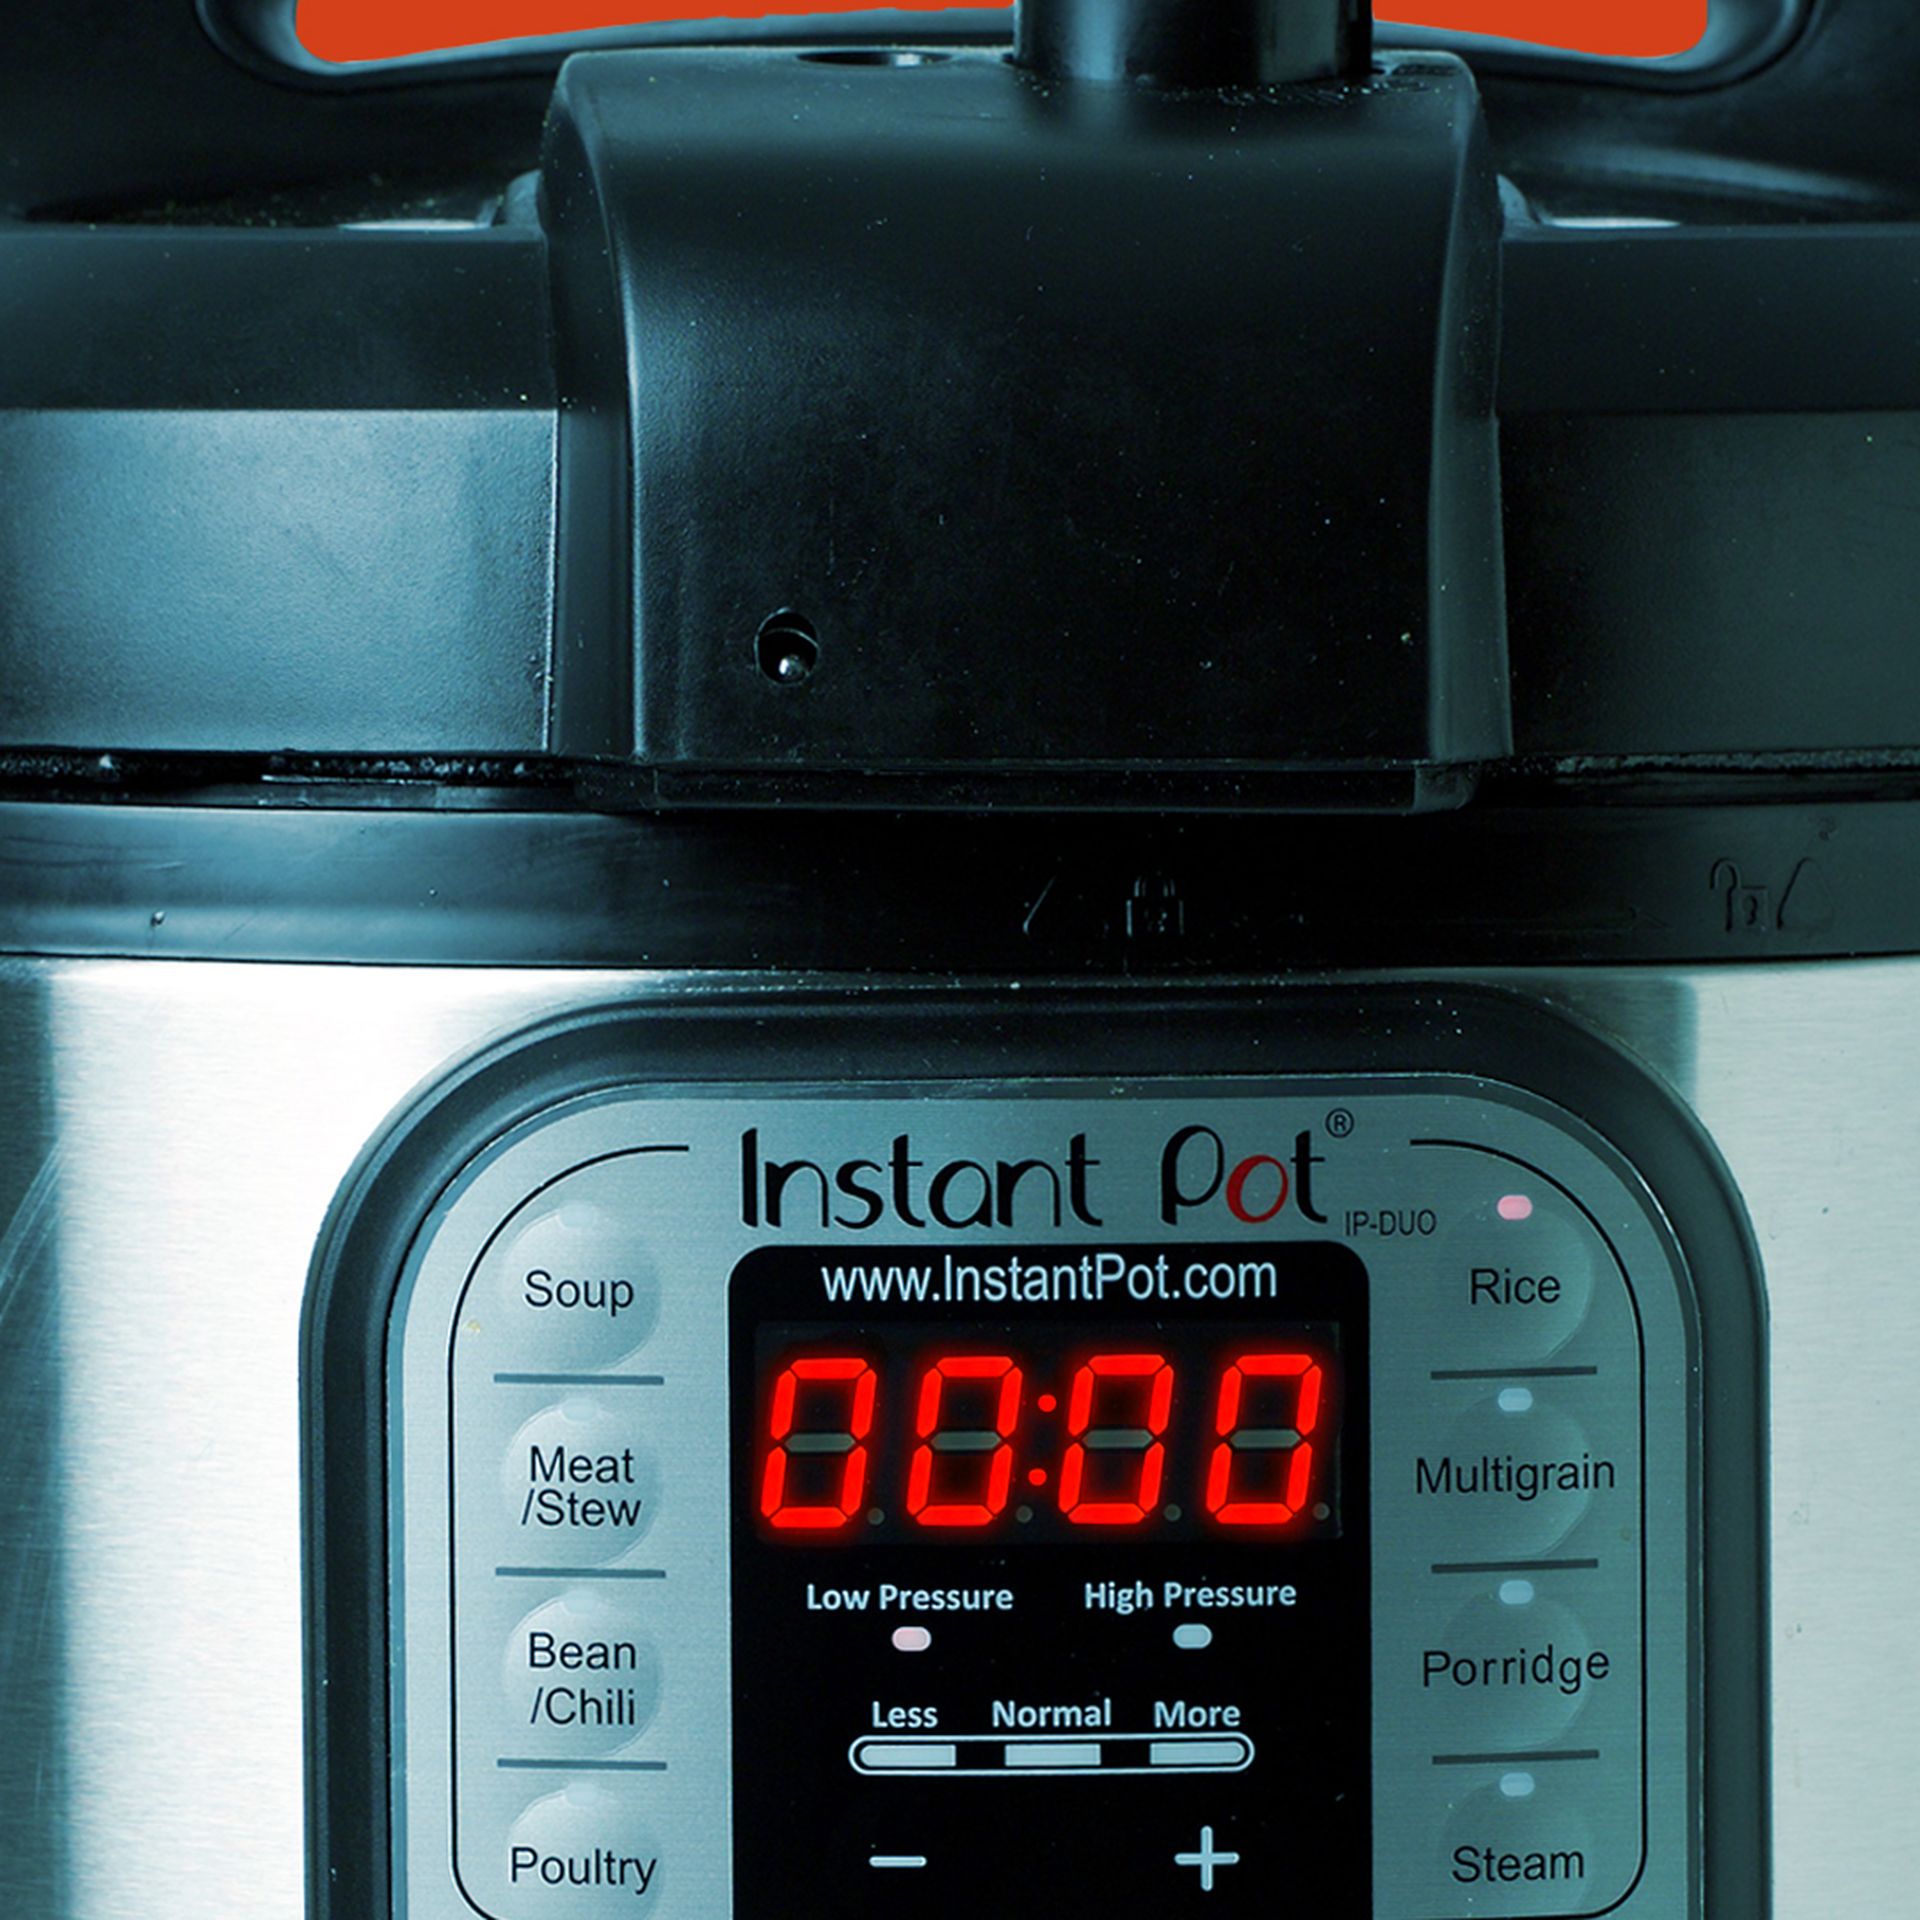 In the bid to grow at all costs, Instant Pot is cooking itself and has  filed for bankruptcy - The Verge